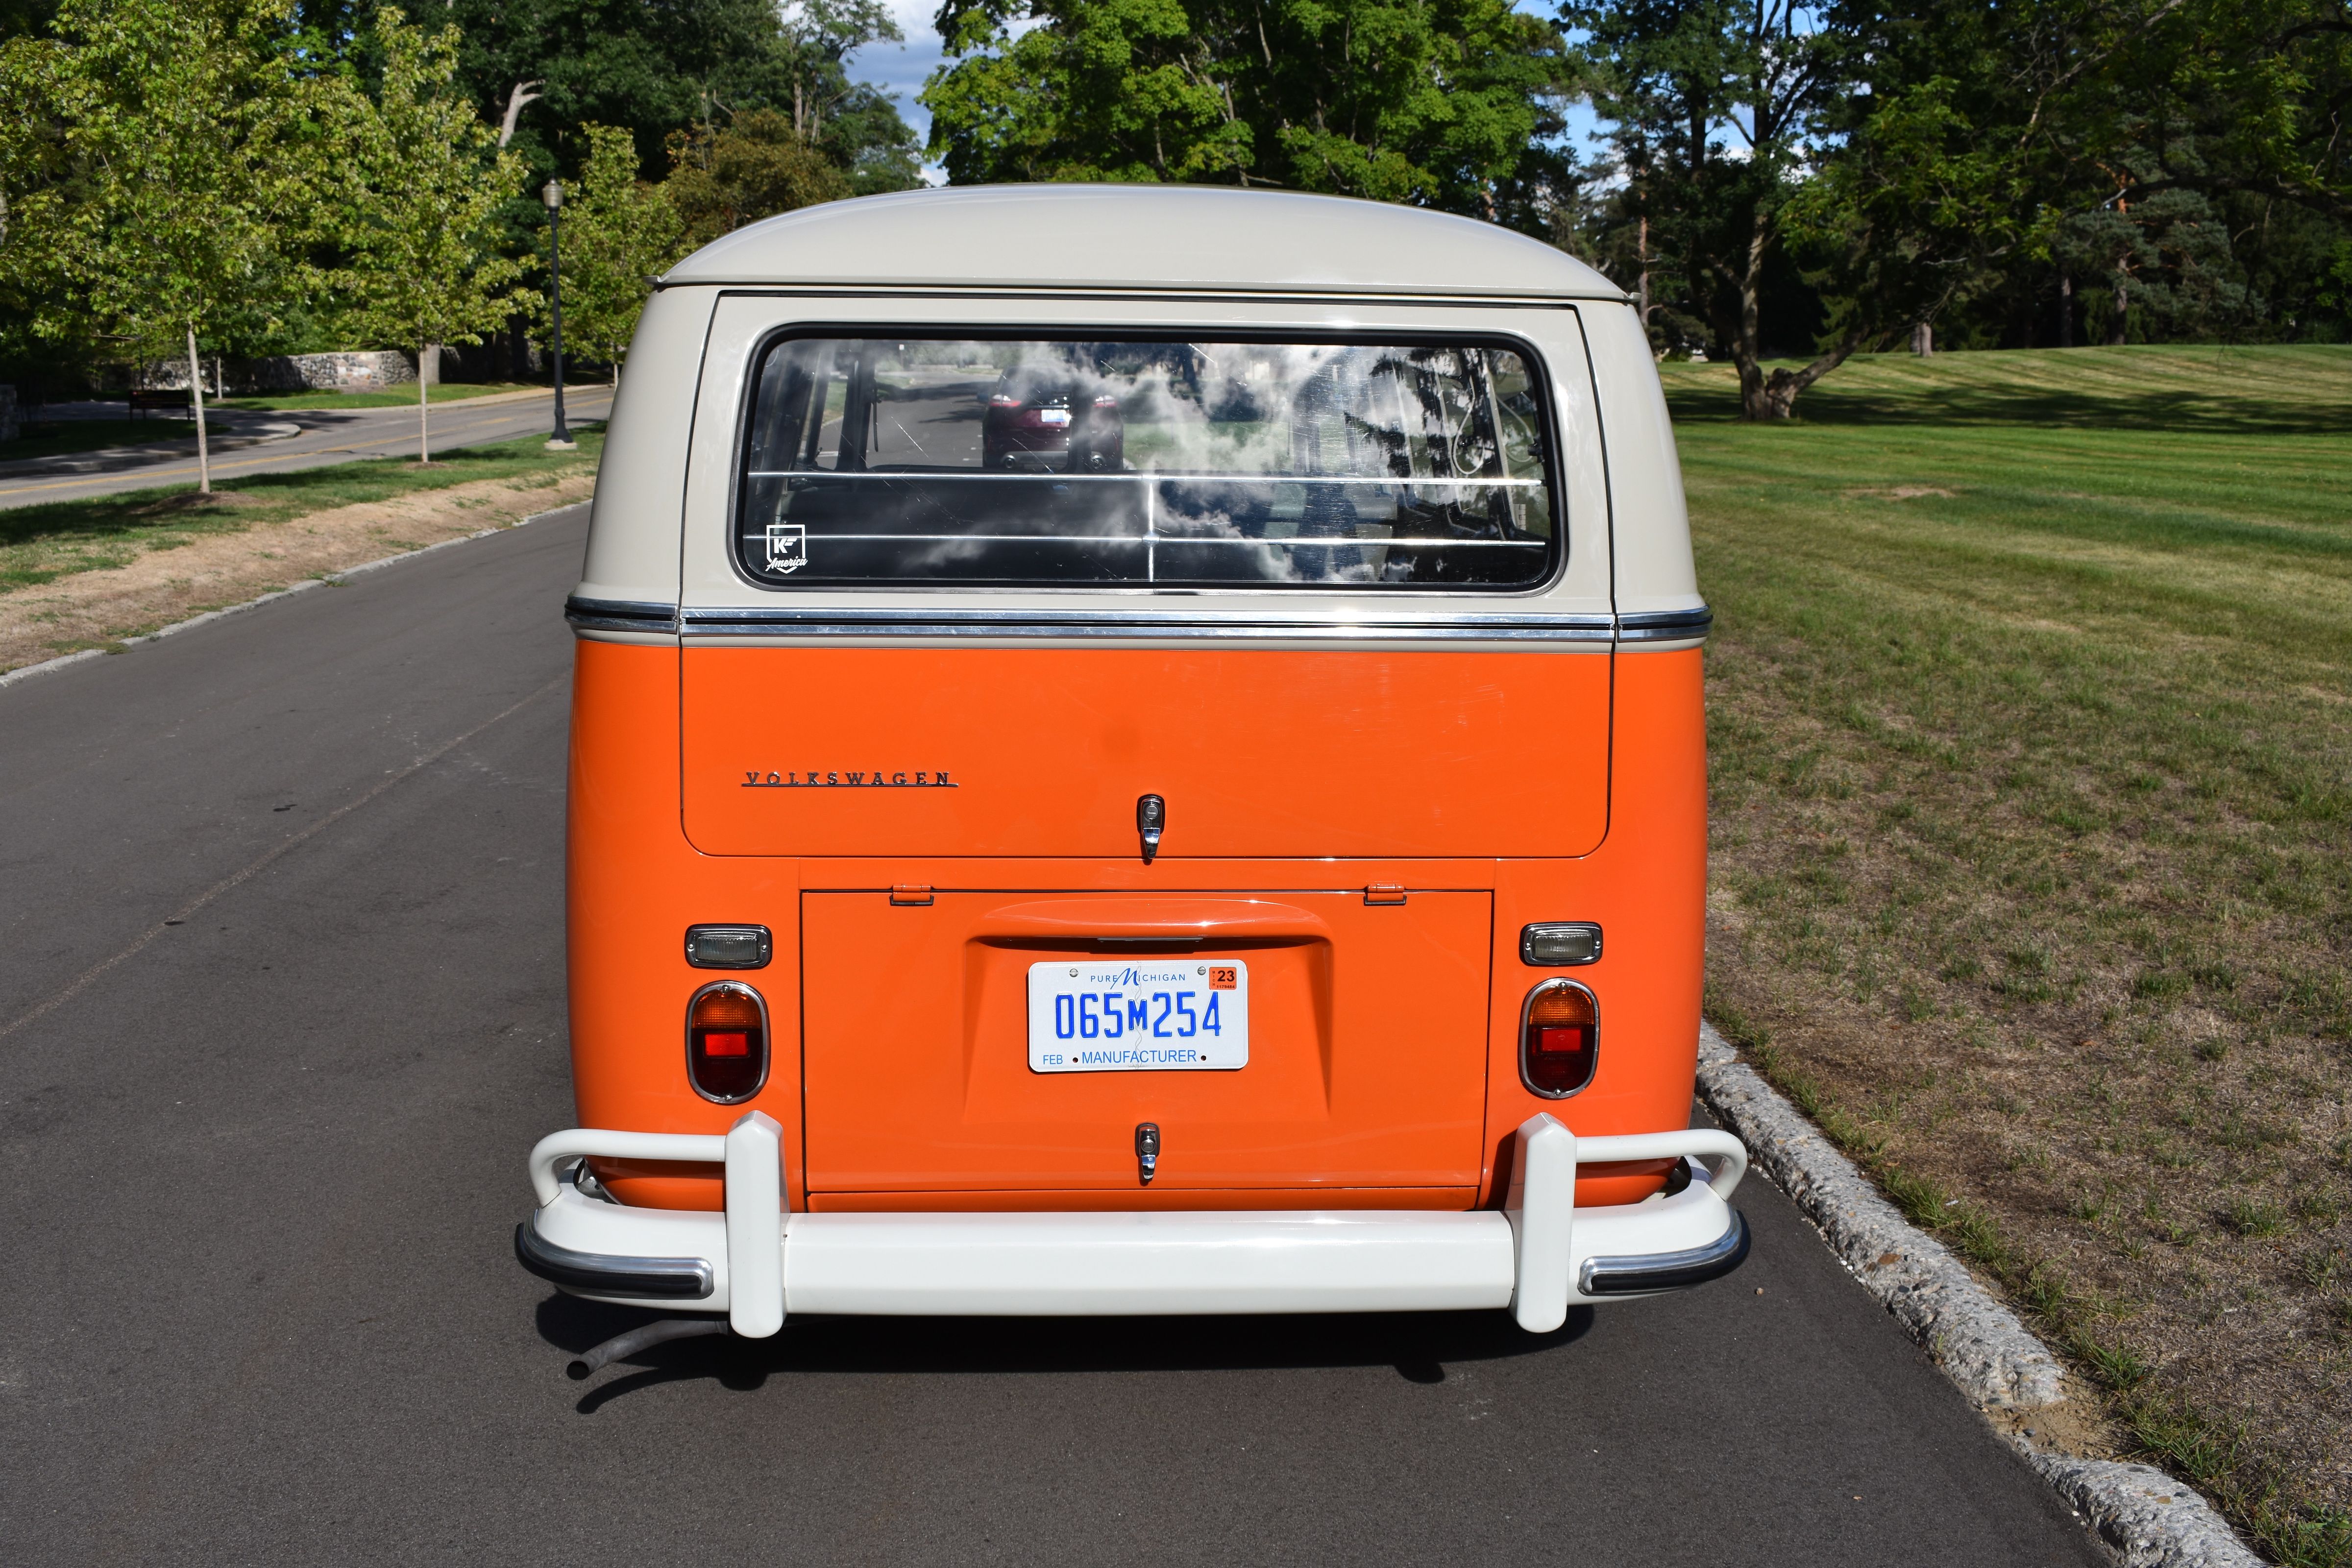 5 Things to About Driving an Old Volkswagen Bus